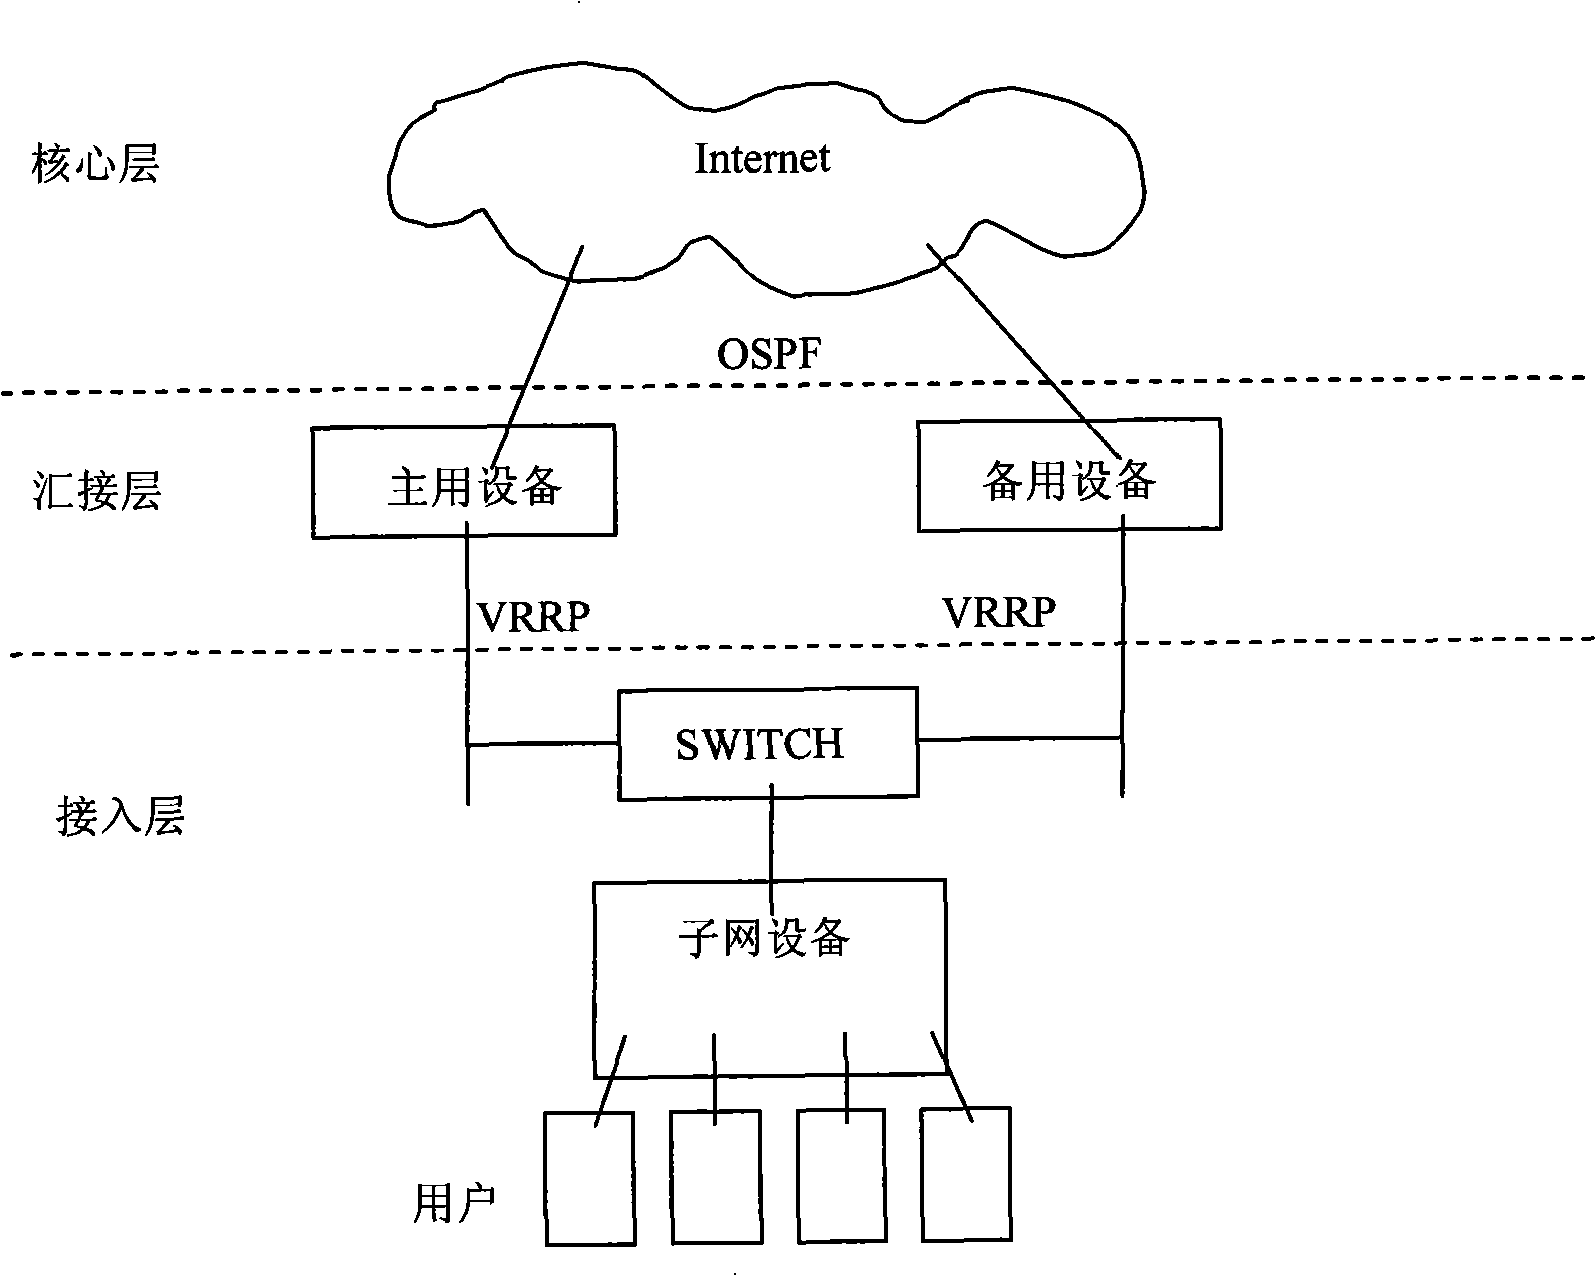 A method for virtual router to establish tunnel